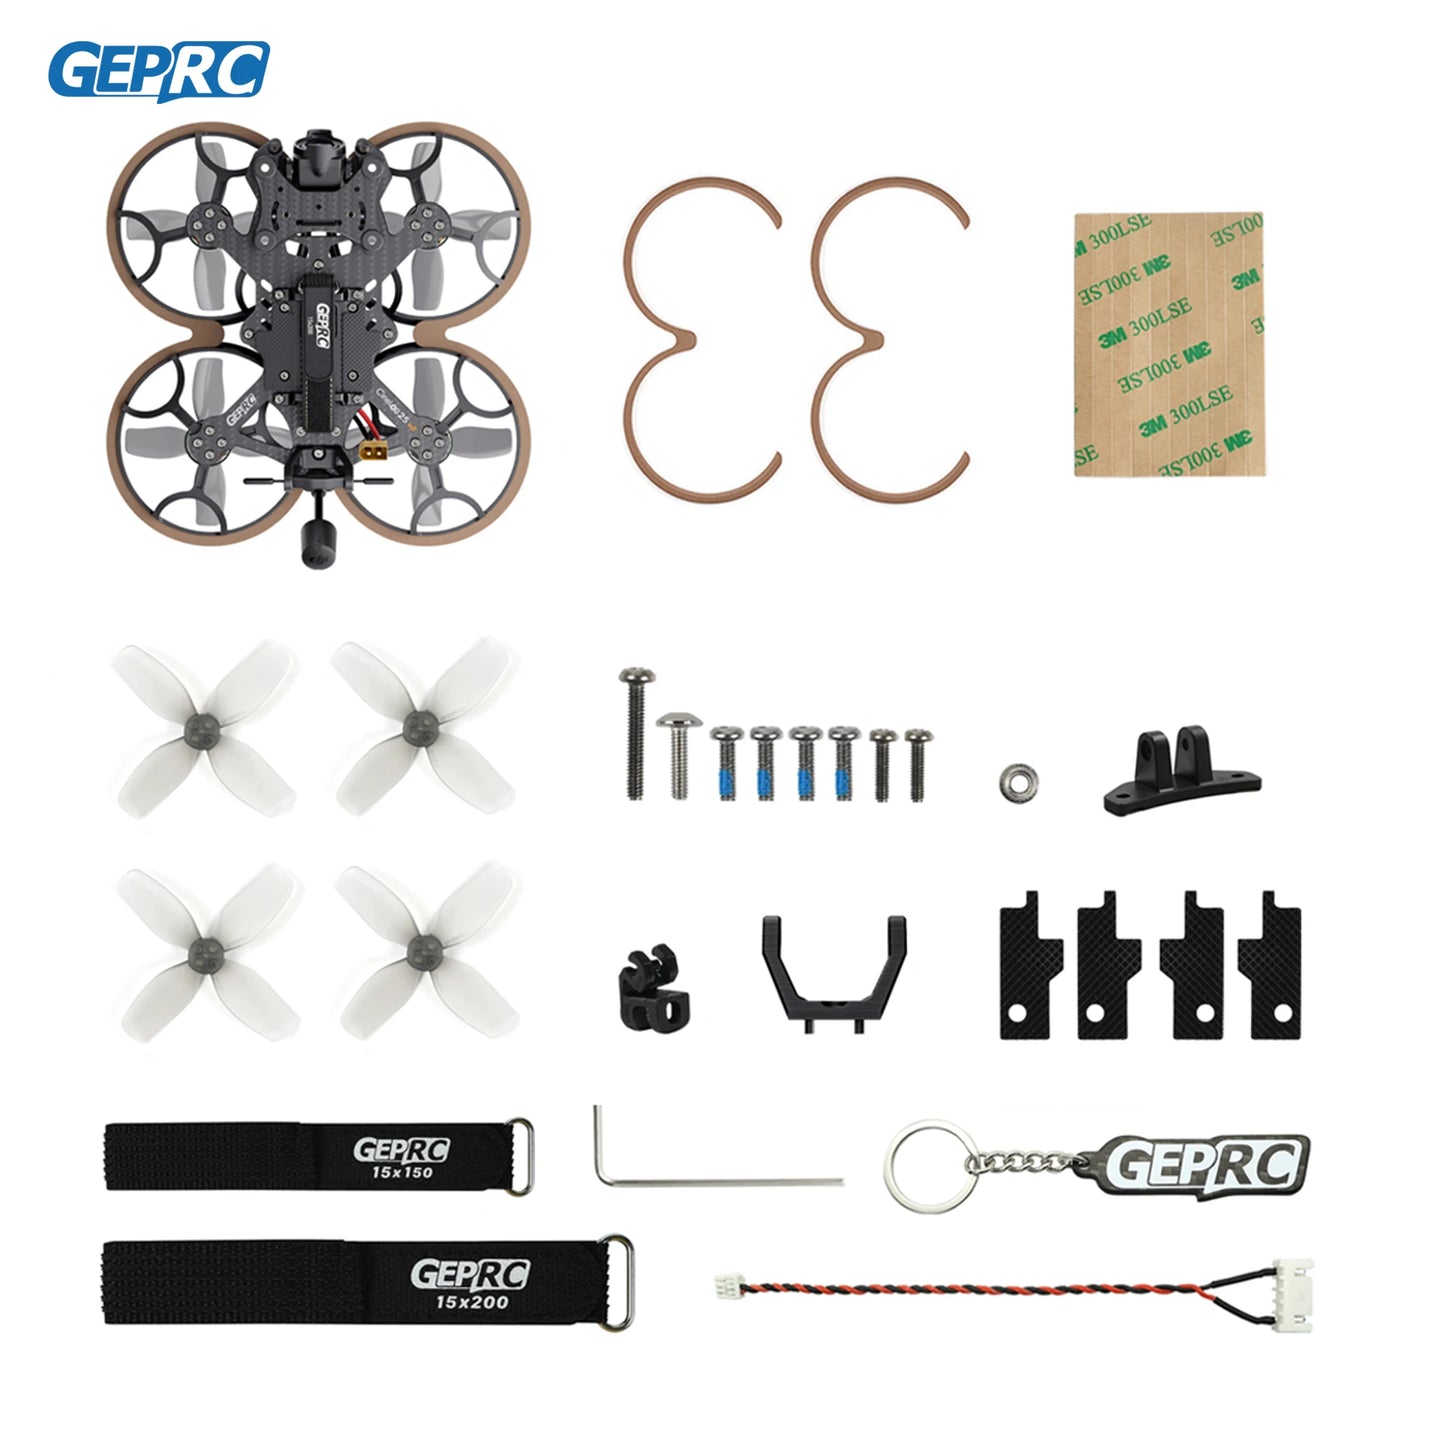 GEPRC Cinelog25 V2 Analog - FPV TAKER G4 35A AIO Caddx Ratel2 Video BNF Mini 4S Freestyle RC Quadcopter Drone Racing Kit 148g